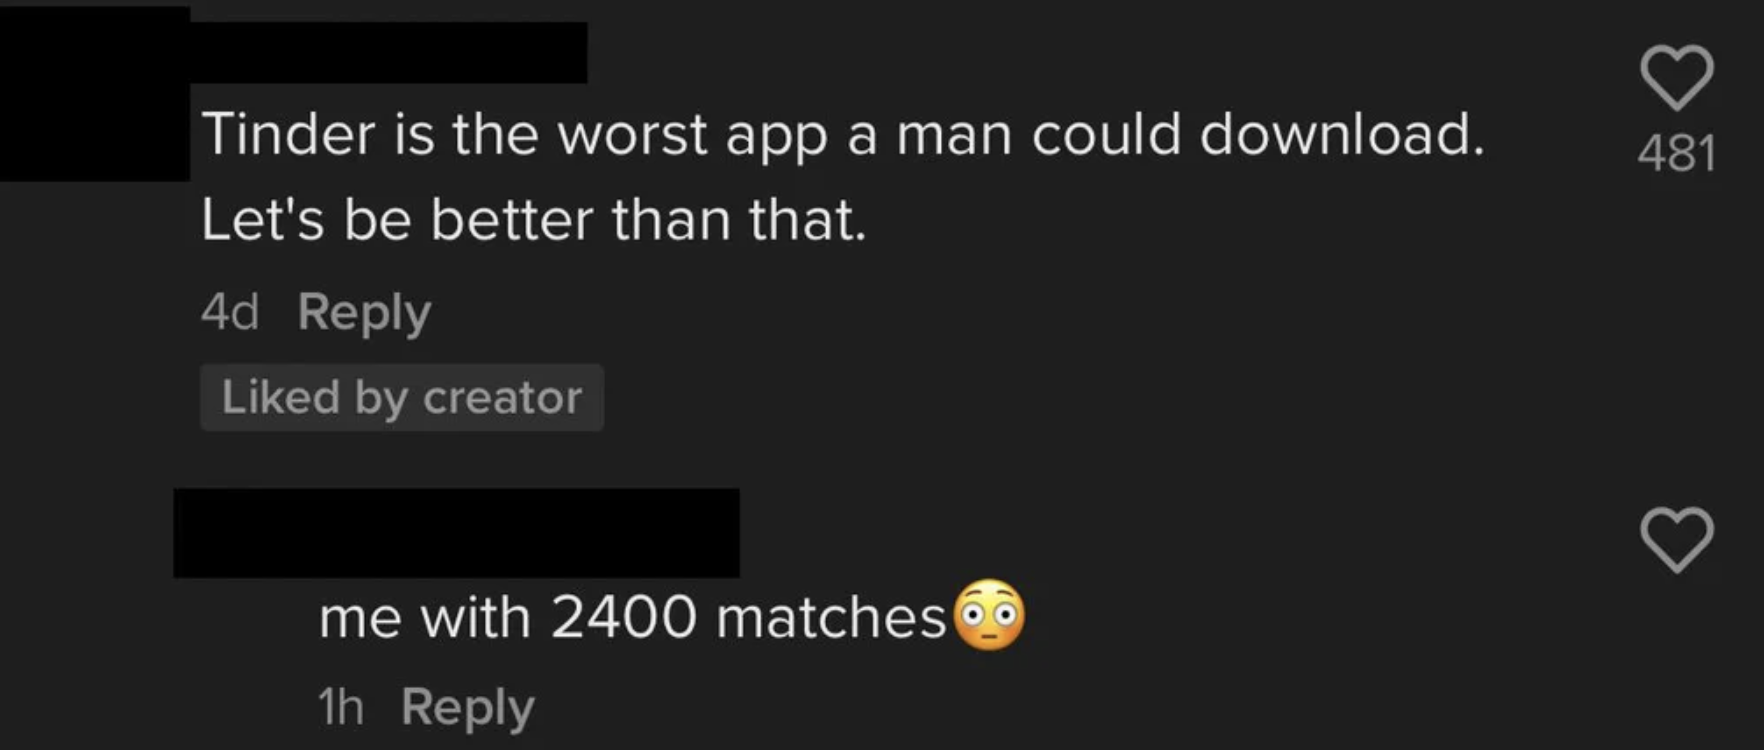 &quot;Tinder is the worst app a man could download&quot;; response: Me with 2,400 matches